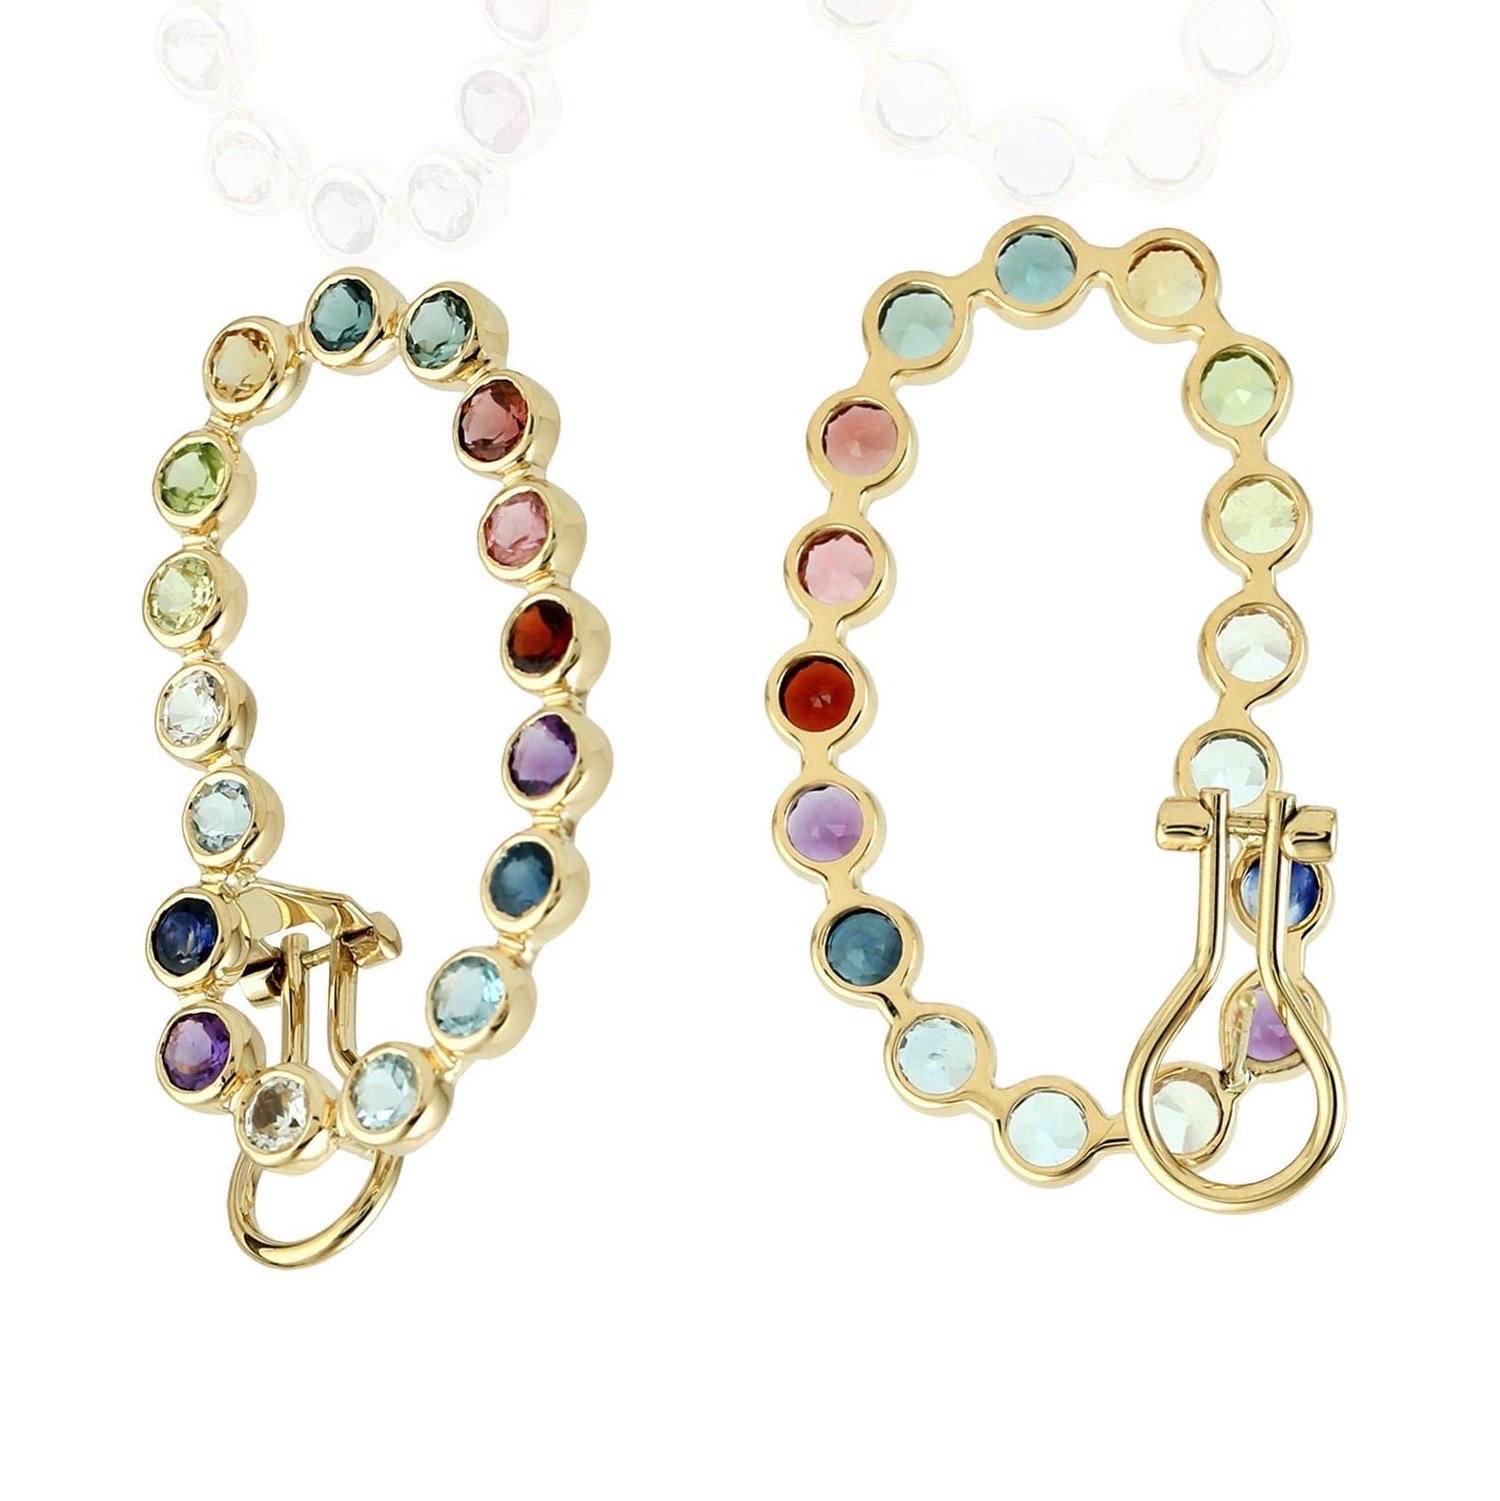 Handcrafted from 18-karat gold, these beautiful multi gemstone earrings are hand set with Tourmaline, Sapphire, Garnet, Peridot, Topaz, Amethyst and Aquamarine

FOLLOW  MEGHNA JEWELS storefront to view the latest collection & exclusive pieces. 